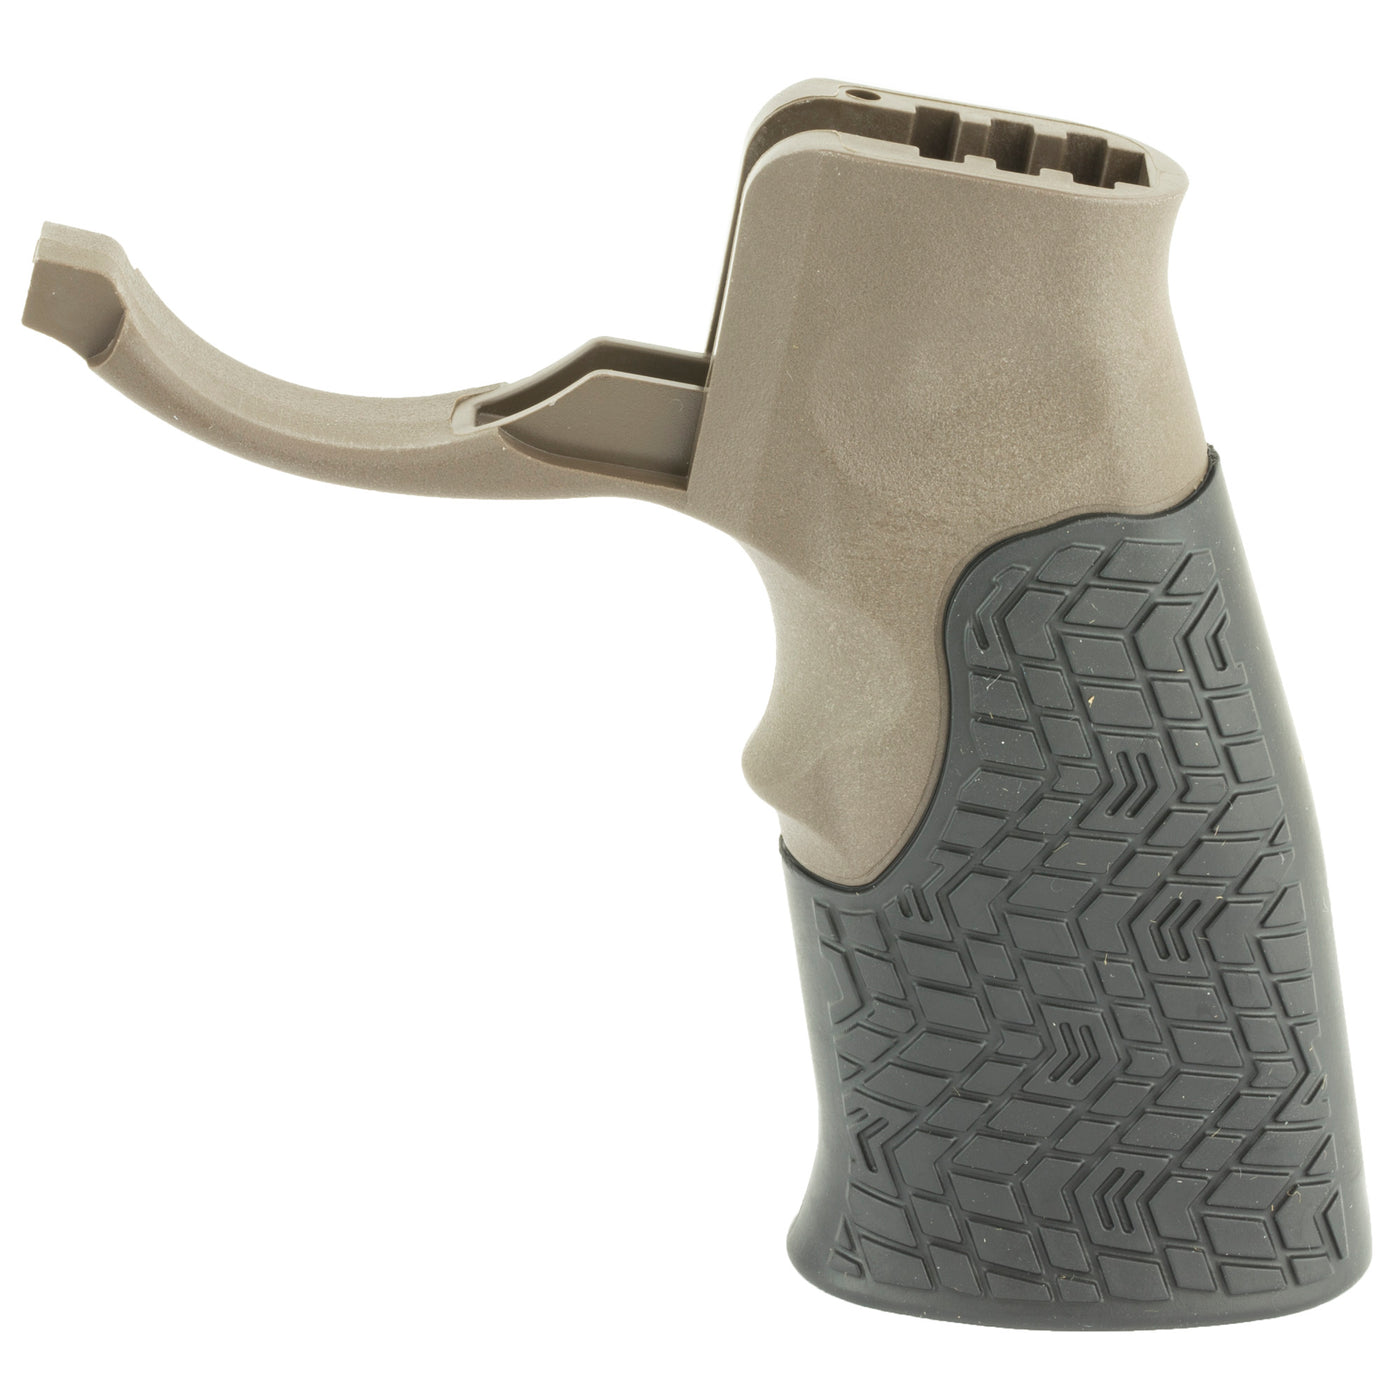 Daniel Def. Grip Ar-15 Brown - With Integrated Trigger Guard